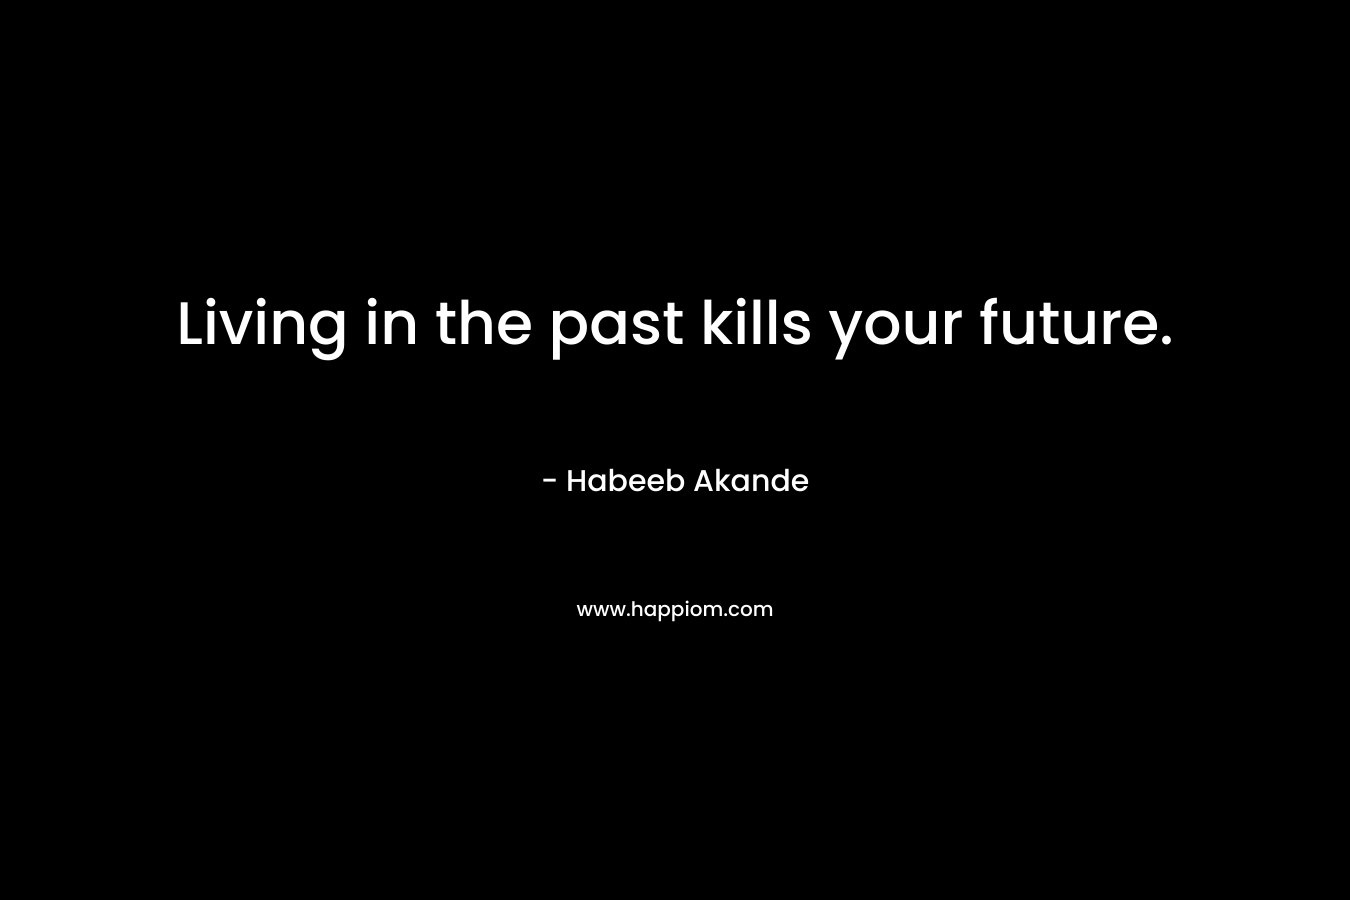 Living in the past kills your future.